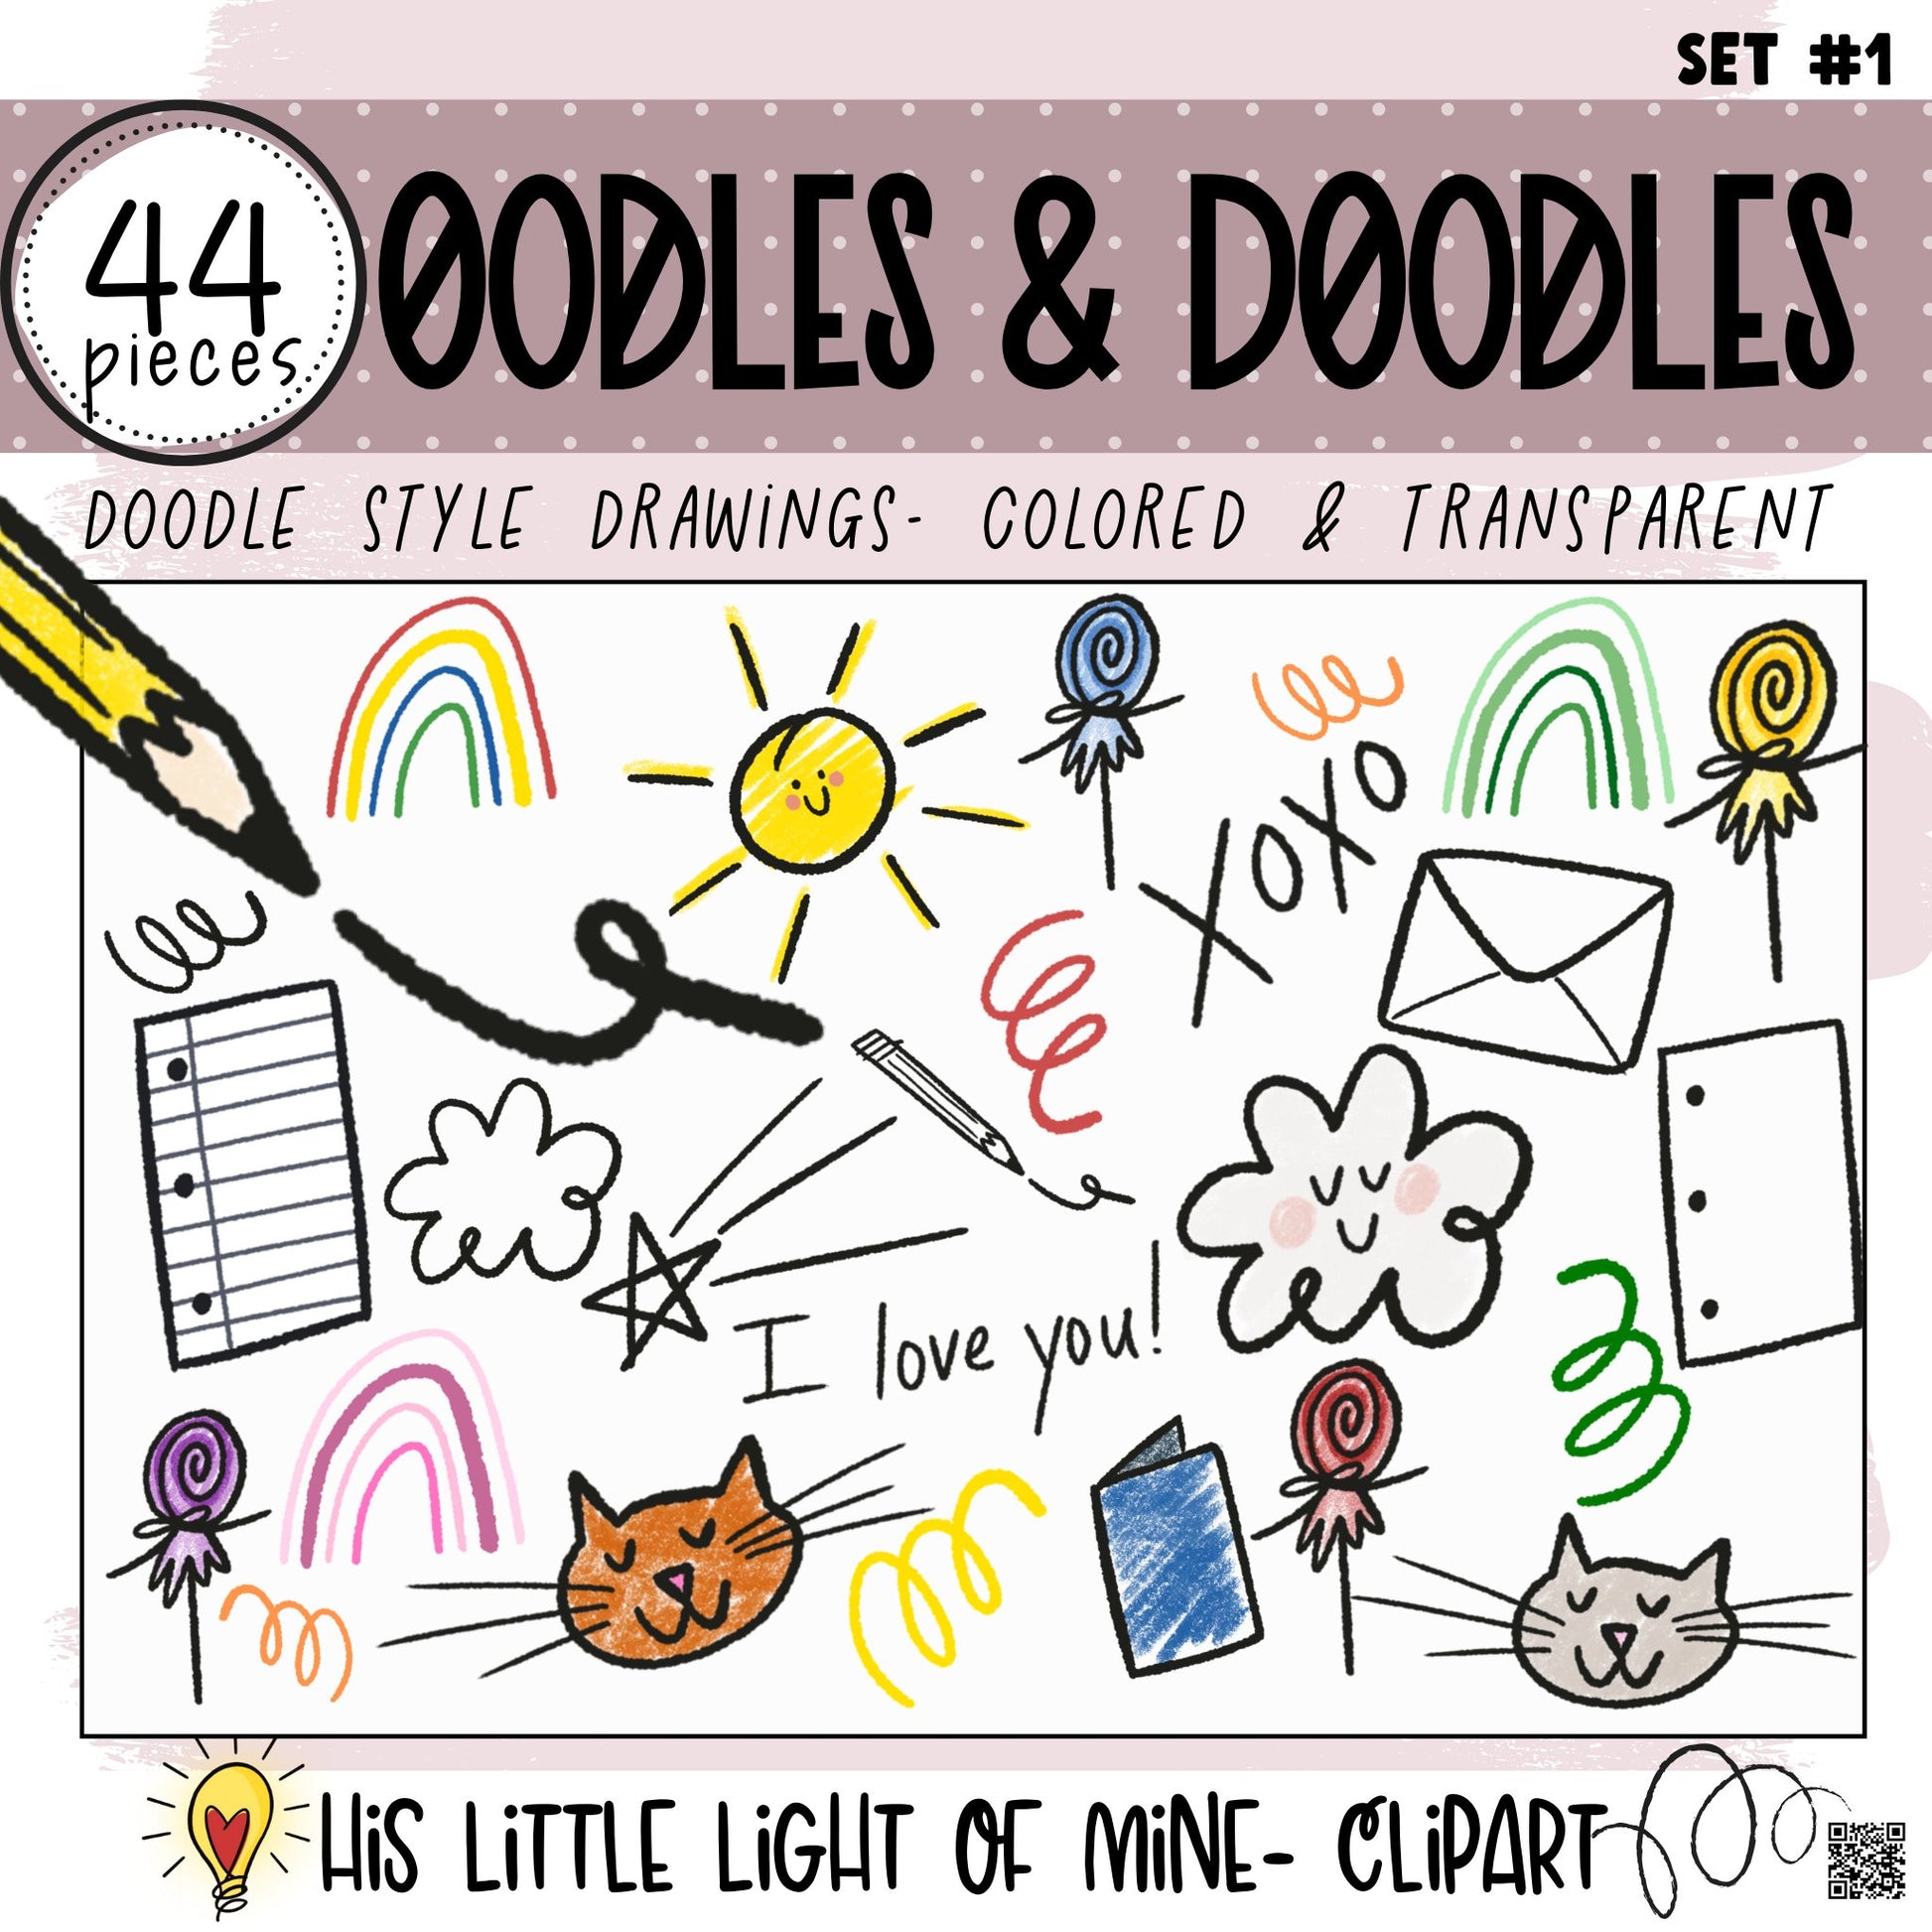 Cover Image of the Oodles & Doodles Clip Art Set #1 clip art pack featuring hand drawn doodle style images including rainbows, swirls, cats, smiles and lollipops in both color and transparent